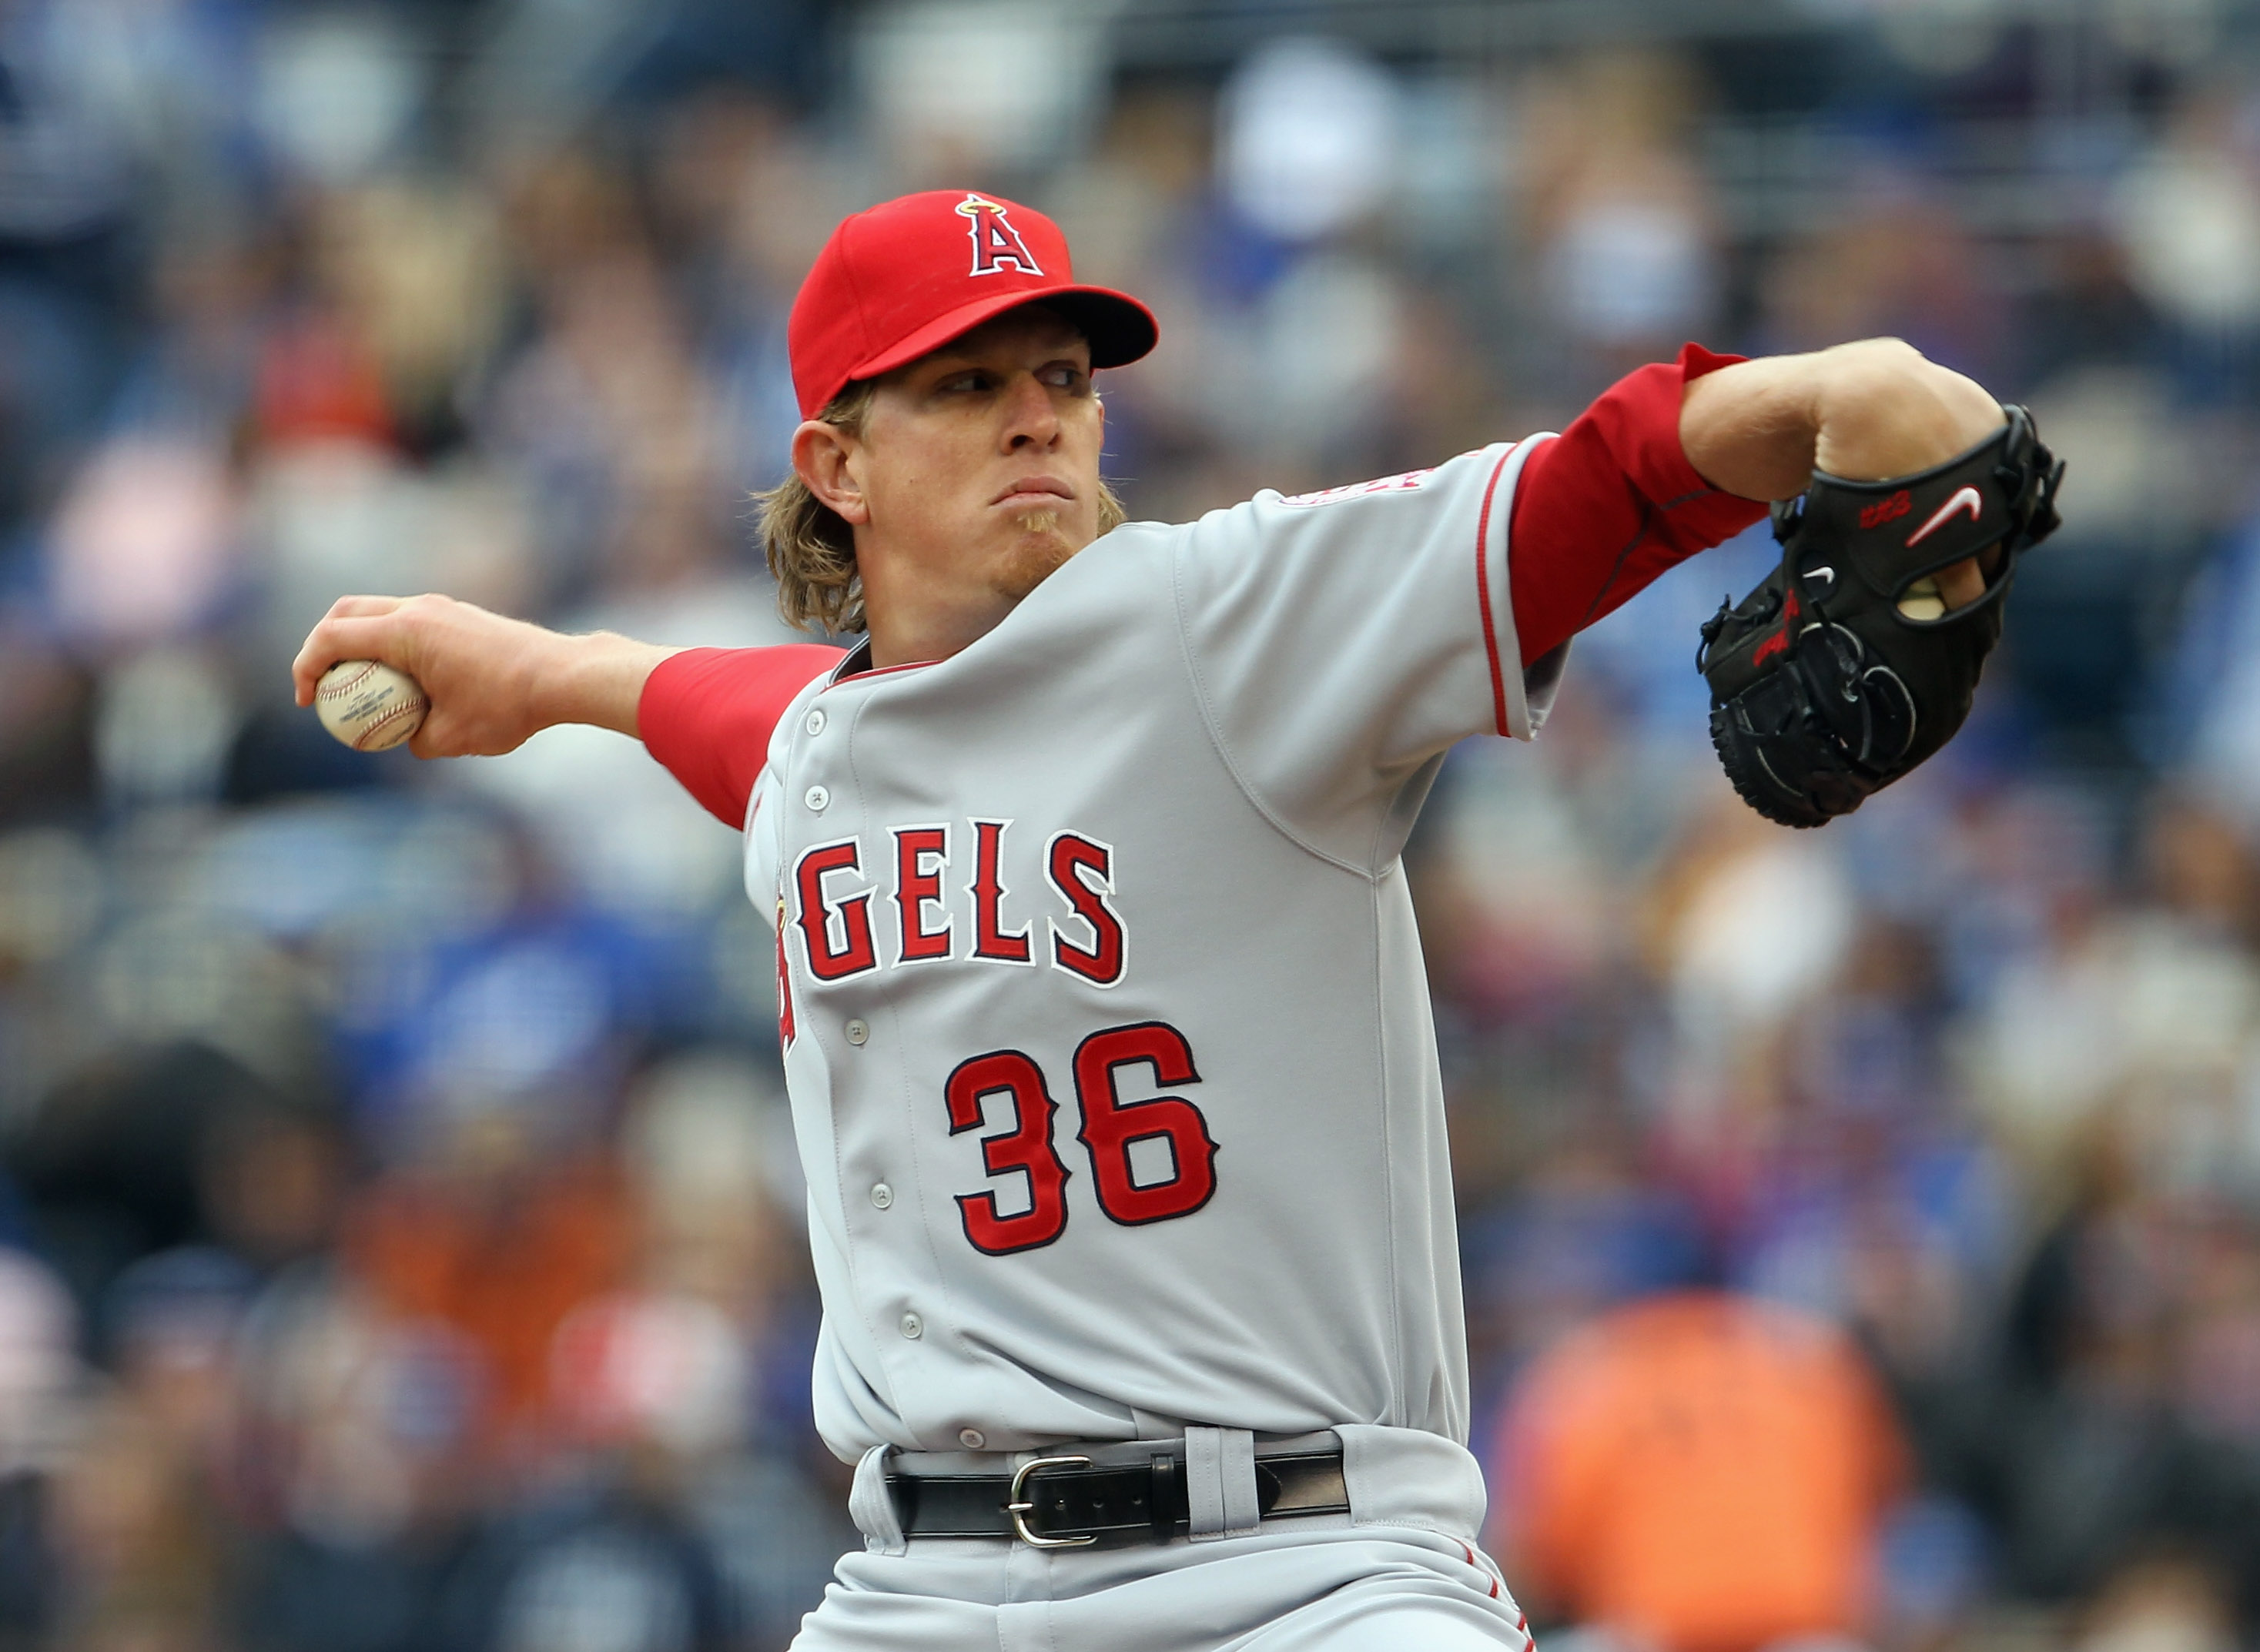 KANSAS CITY, MO - MARCH 31:  Starting pitcher Jered Weaver #36 of the Los Angeles Angels of Anaheim delivers his first pitch during the 1st inning of the opening day game against the Kansas City Royals at Kauffman Stadium on March 31, 2011 in Kansas City,